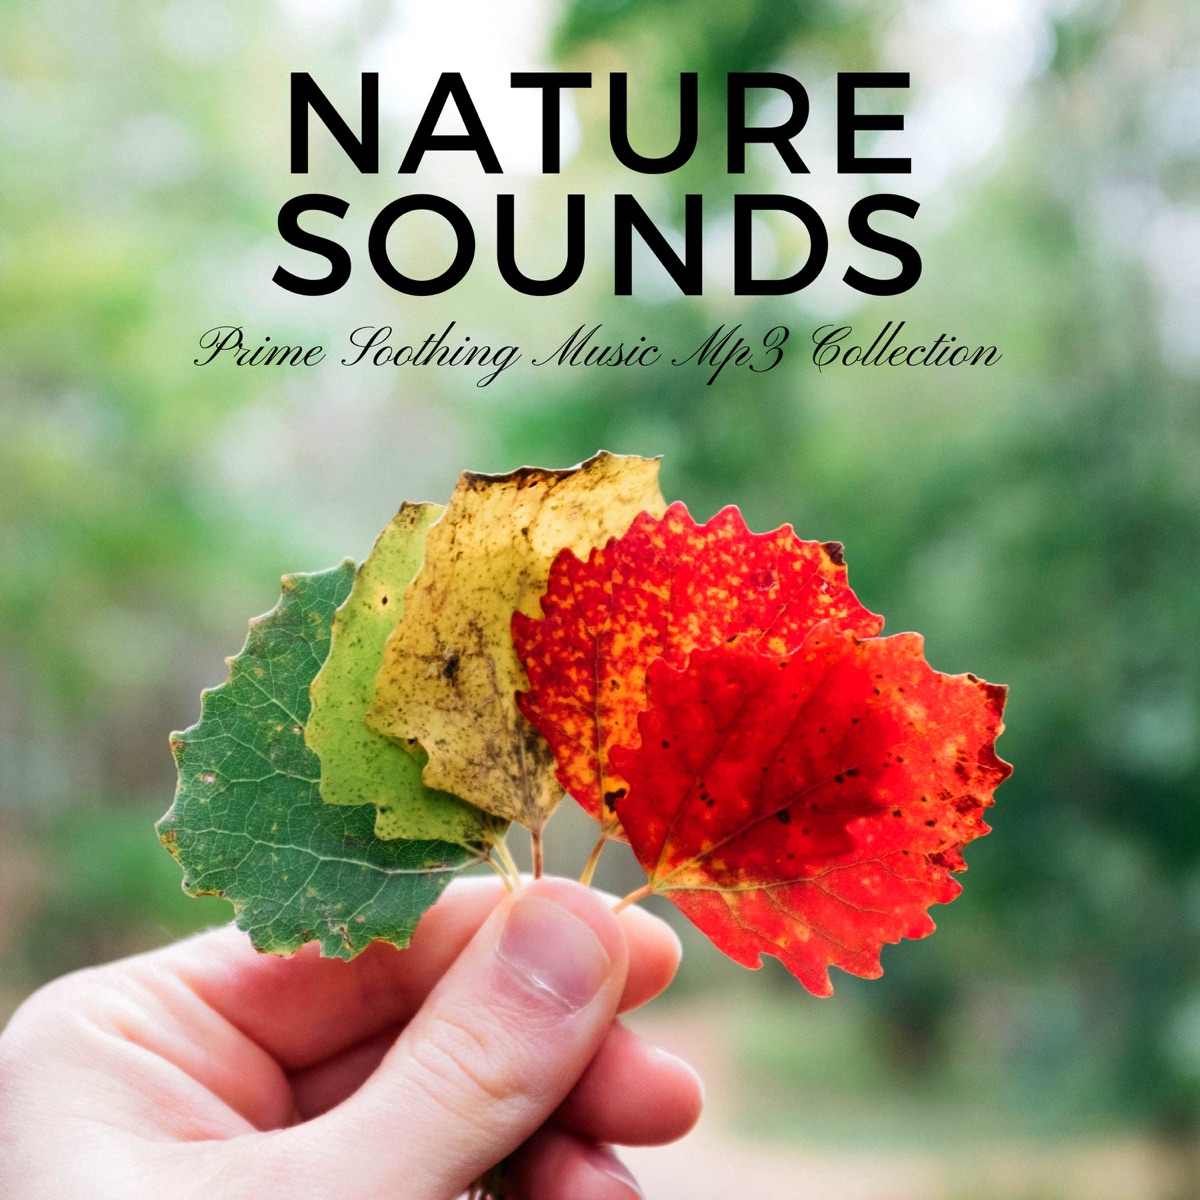 Nature Sounds - Prime Soothing Music Mp3 Collection - Album by Ambience  Sounds of Nature Specialists & Sleep Sounds of Nature - Apple Music